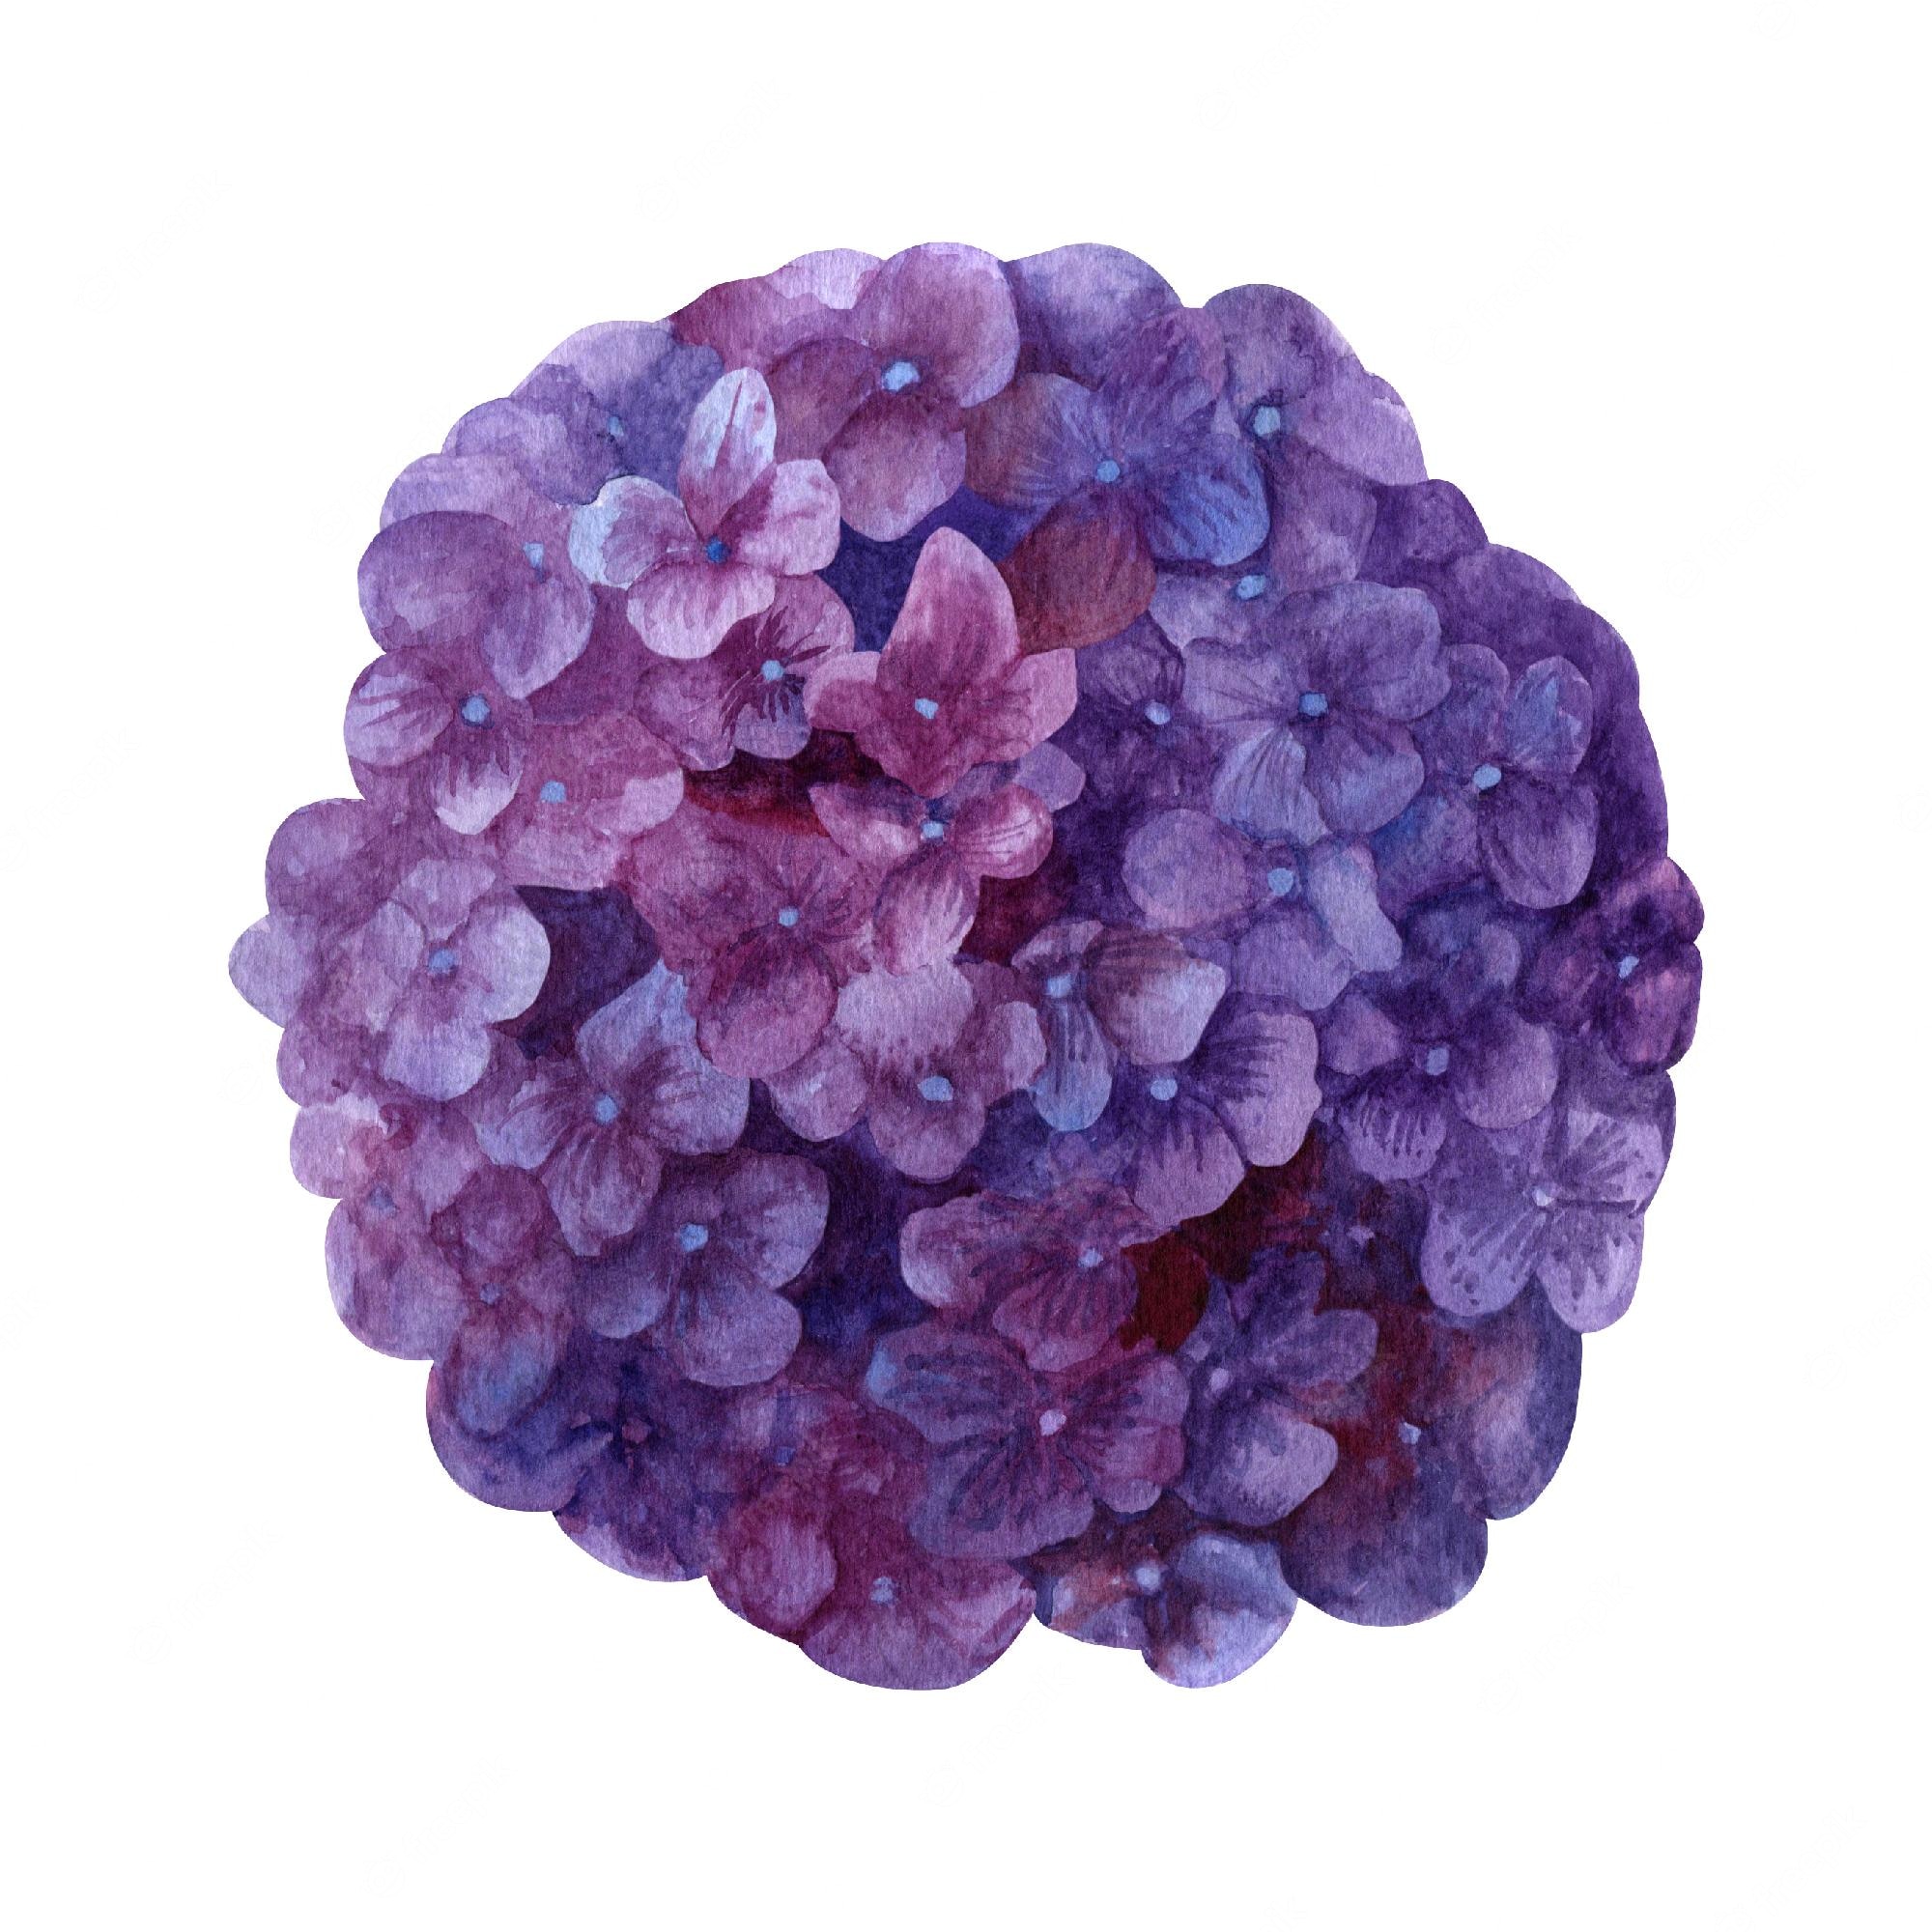 Hydrangea Flower Photography Royalty-free Clip Art, PNG, 800x800px ...